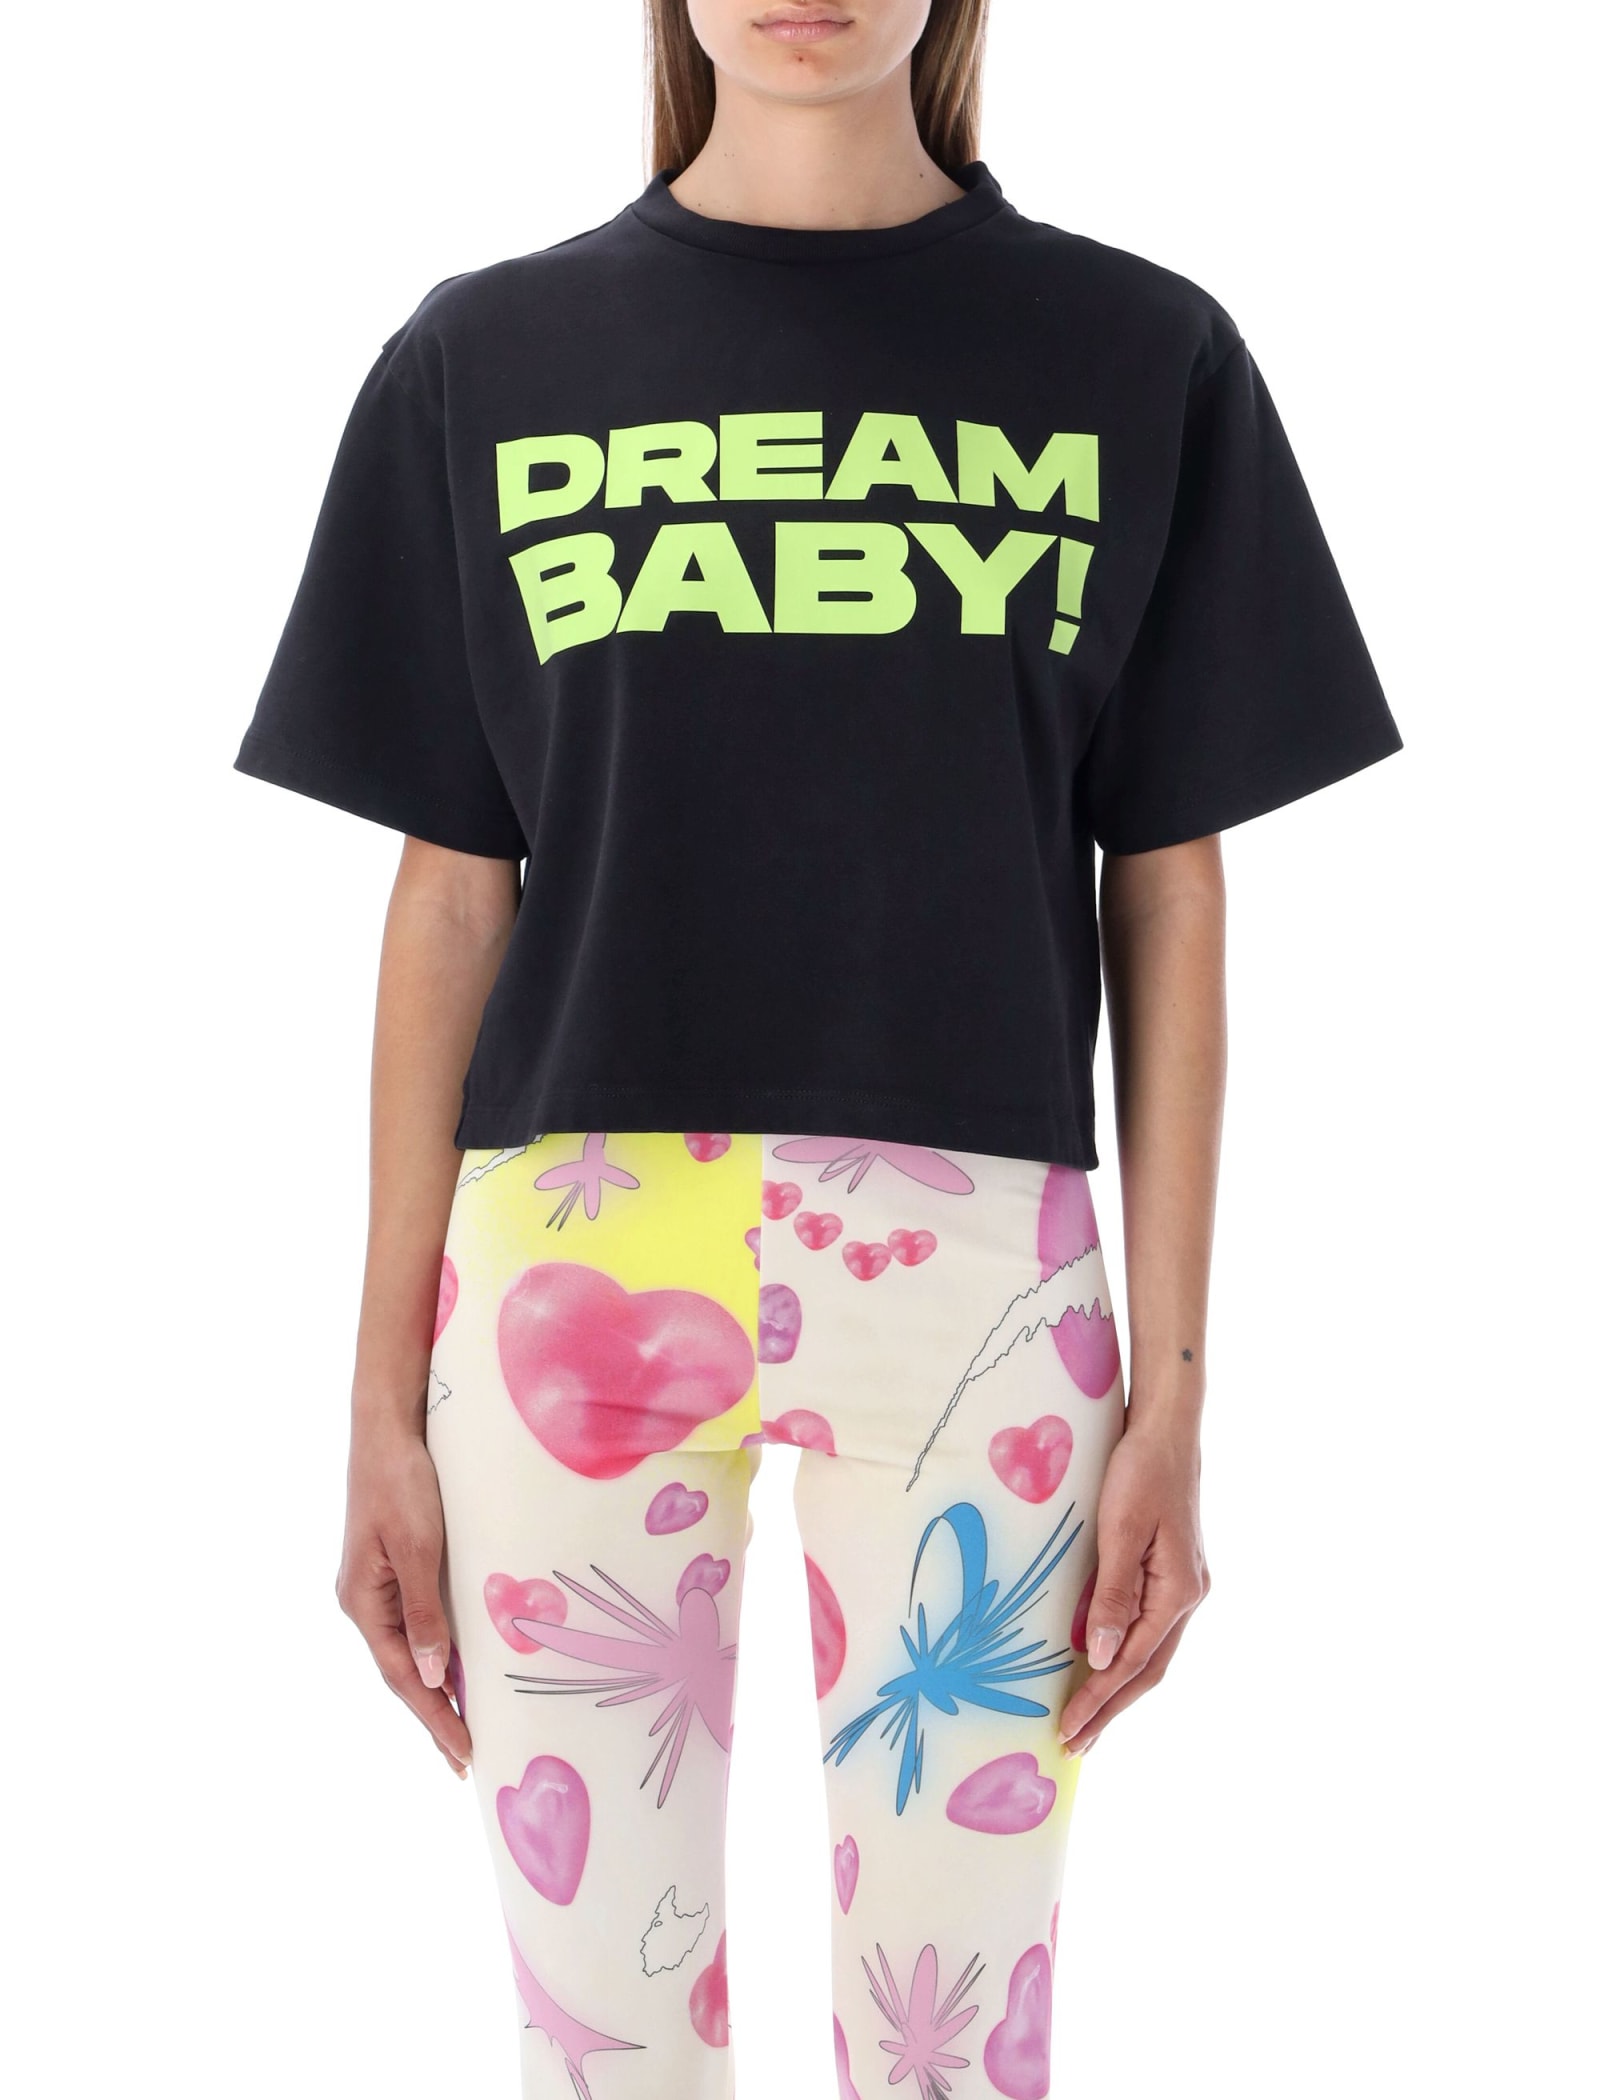 LIBERAL YOUTH MINISTRY DREAM BABY T-SHIRT